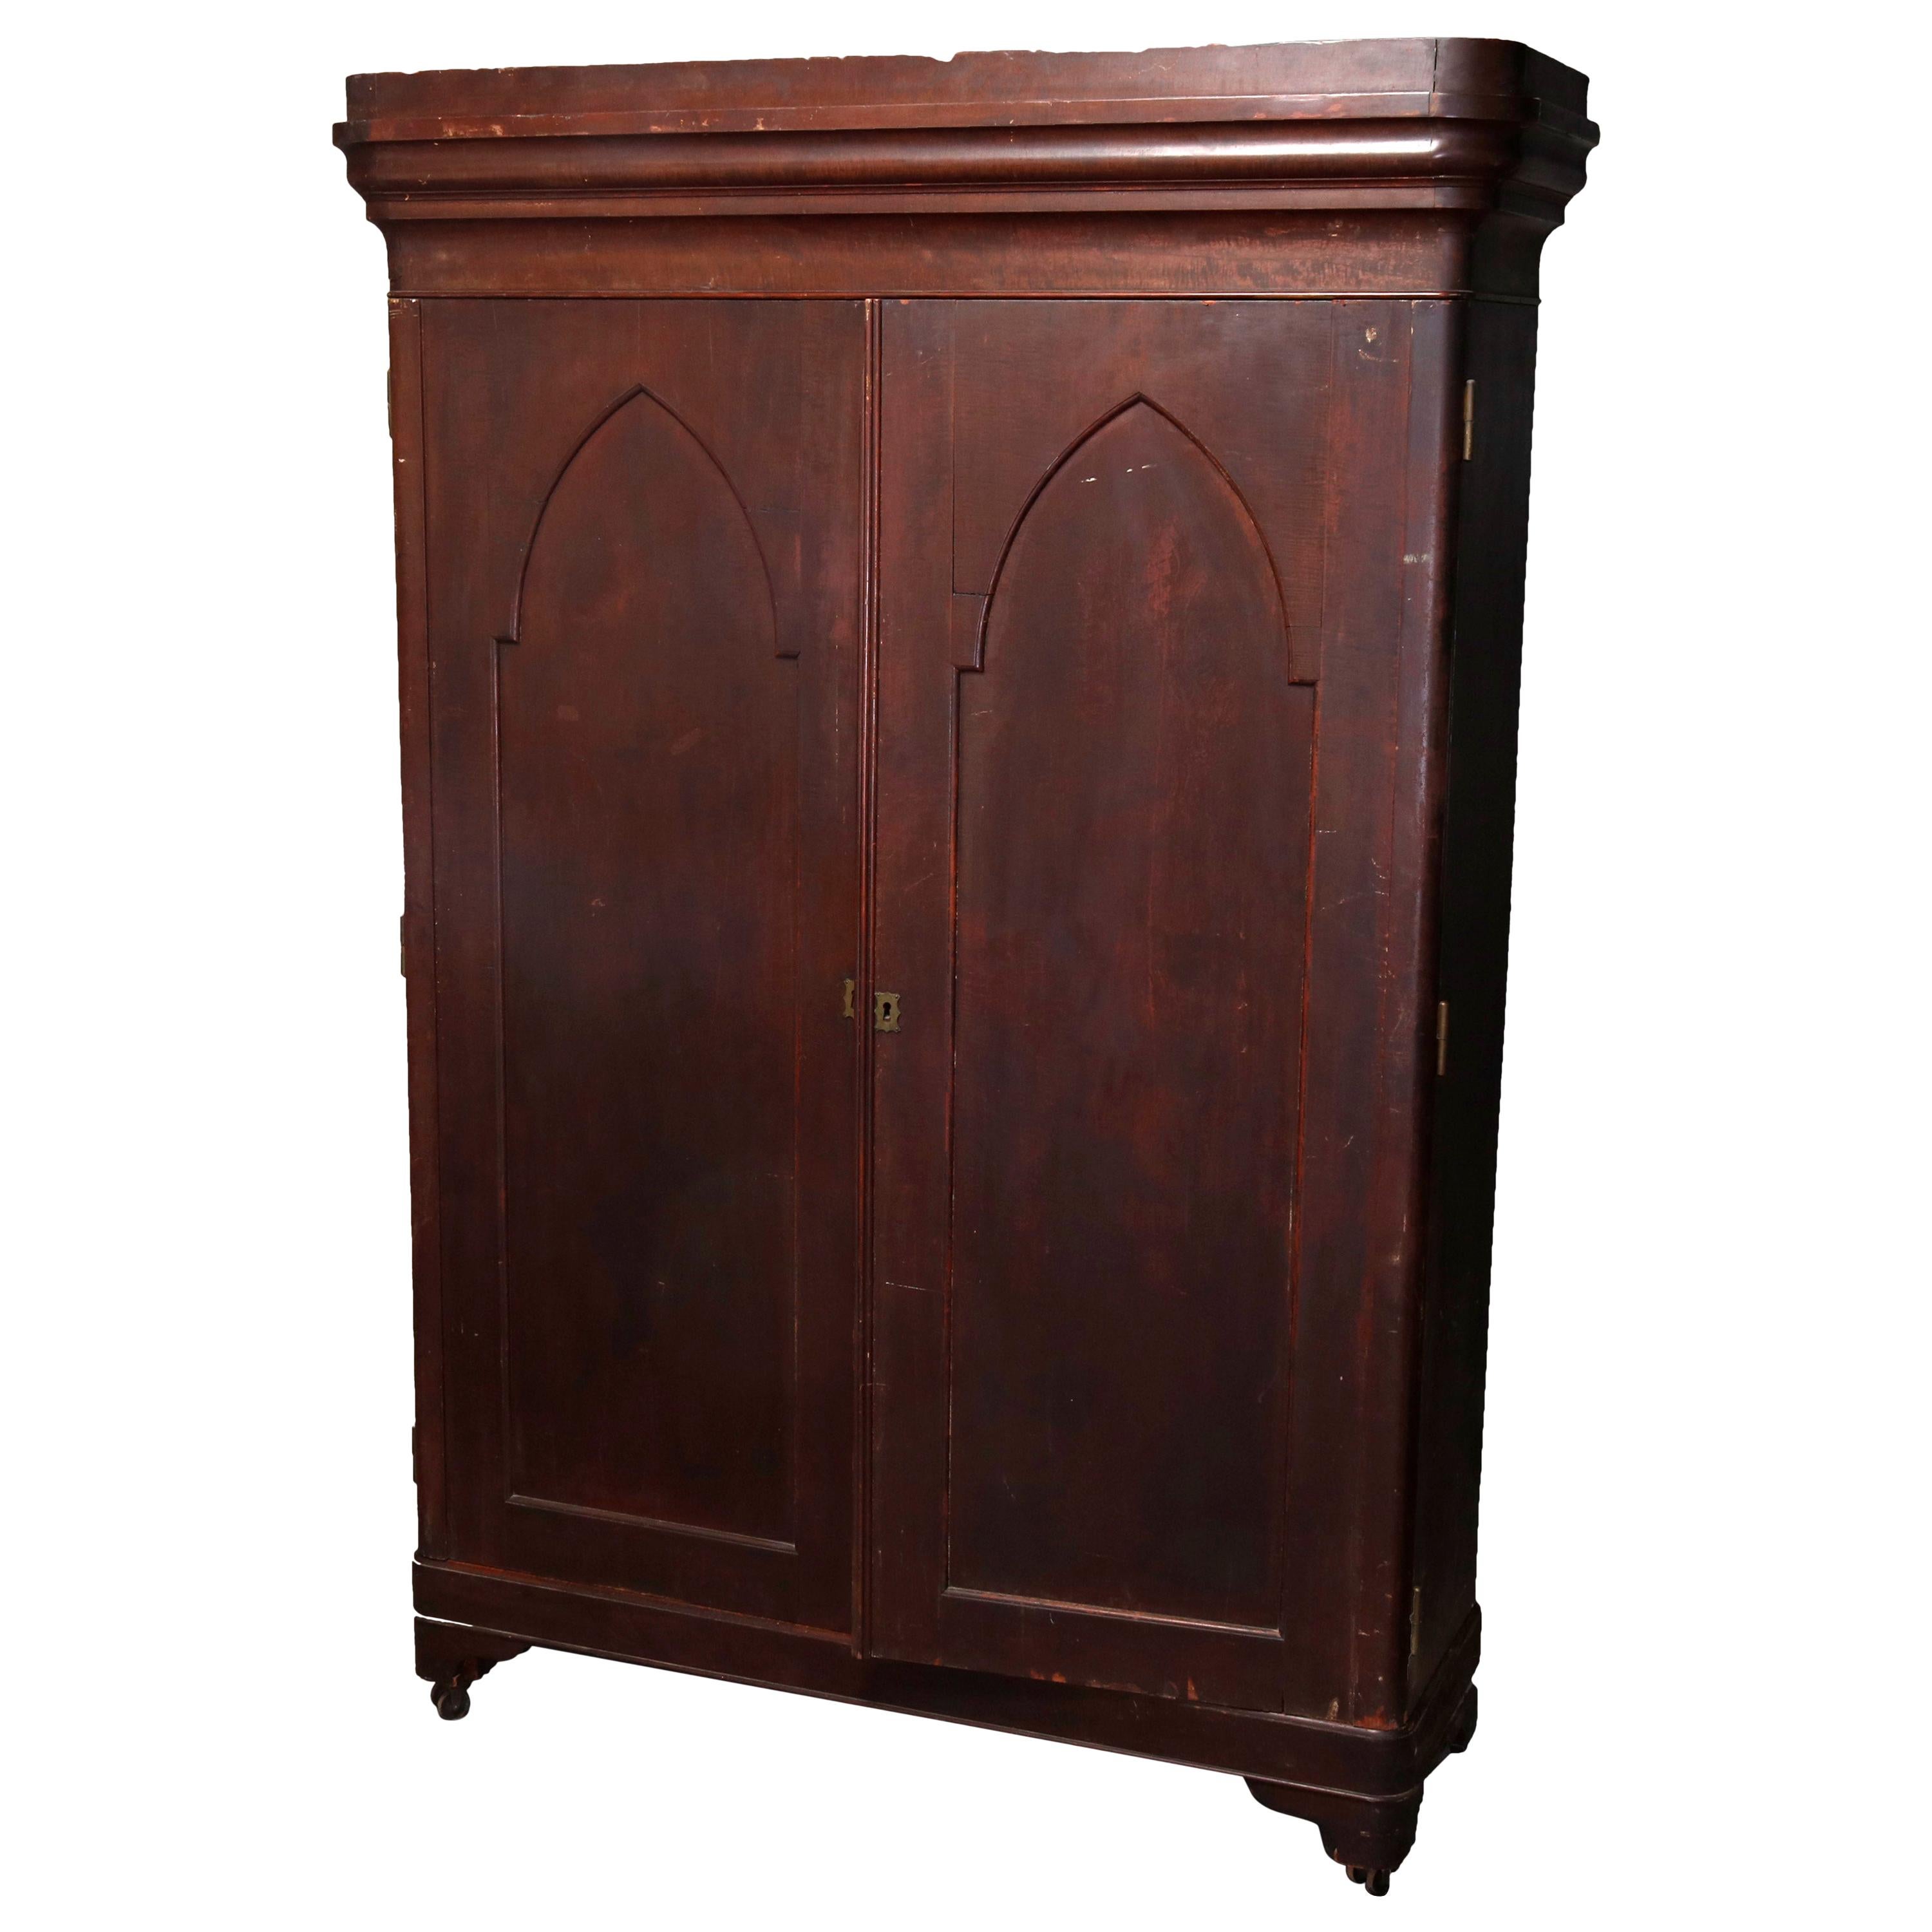 Antique American Empire Flame Mahogany Gothic Style Double Door Armoire